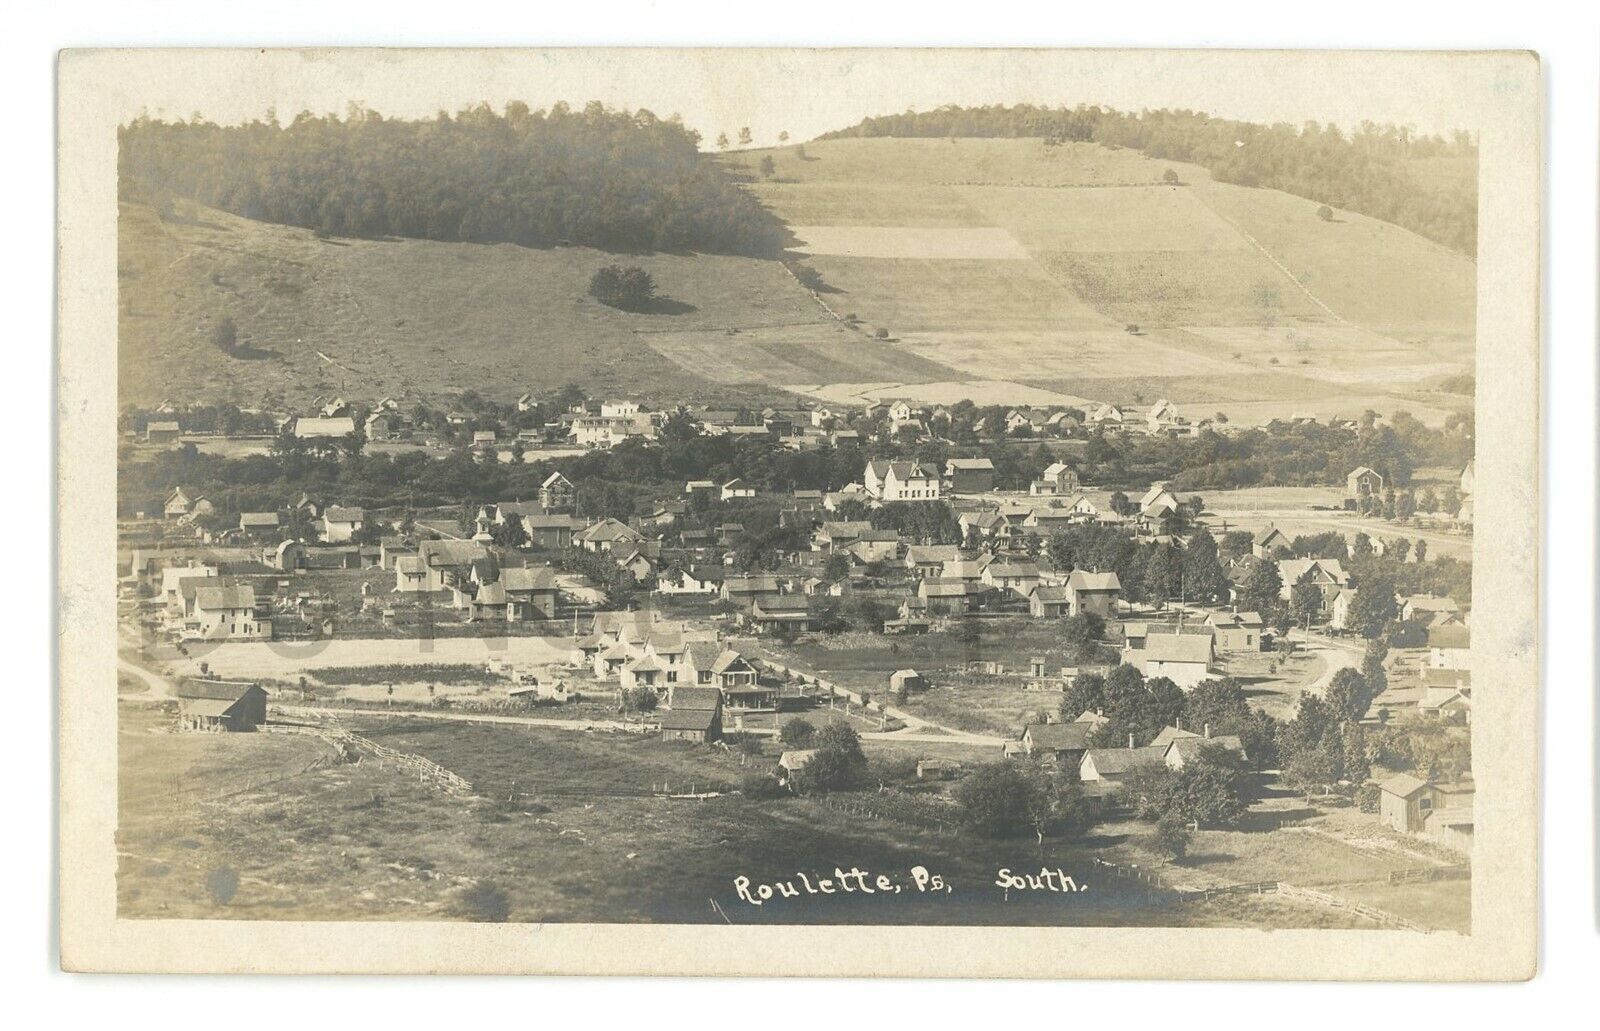 RPPC Aerial View South ROULETTE PA Potter County Real Photo Postcard